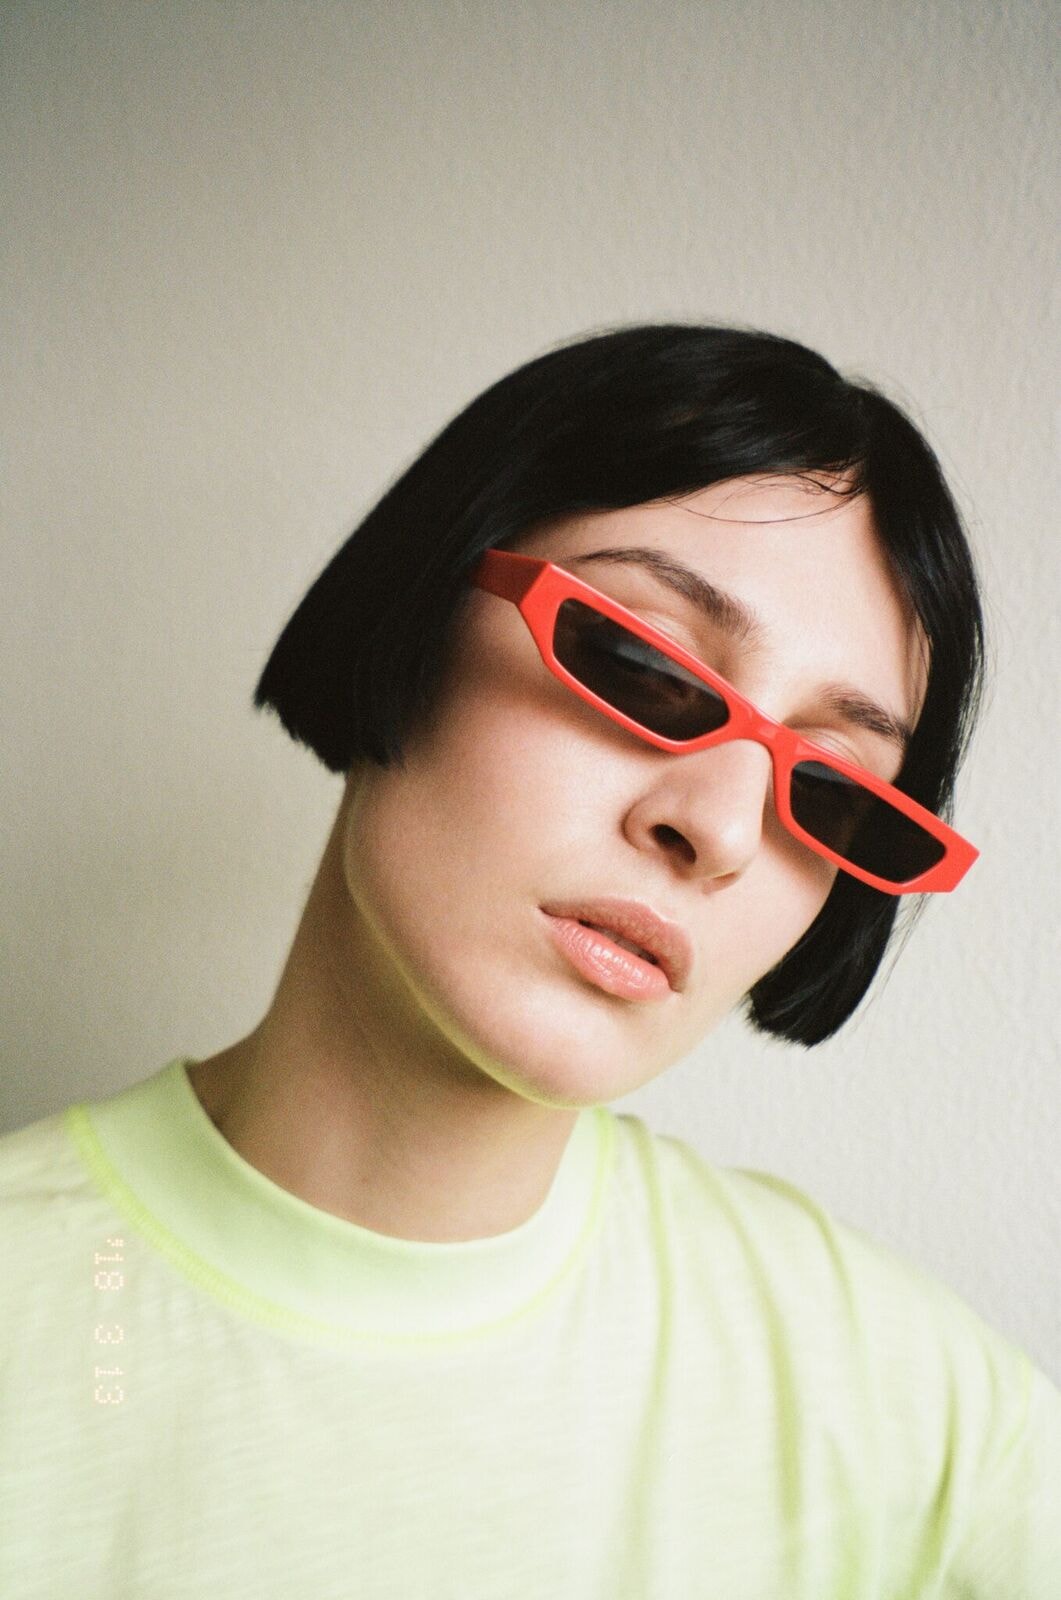 Ace & Tate Futuristic Sunglasses in Pris and Neo Yellow Black Red Sci-Fi Movie Characters